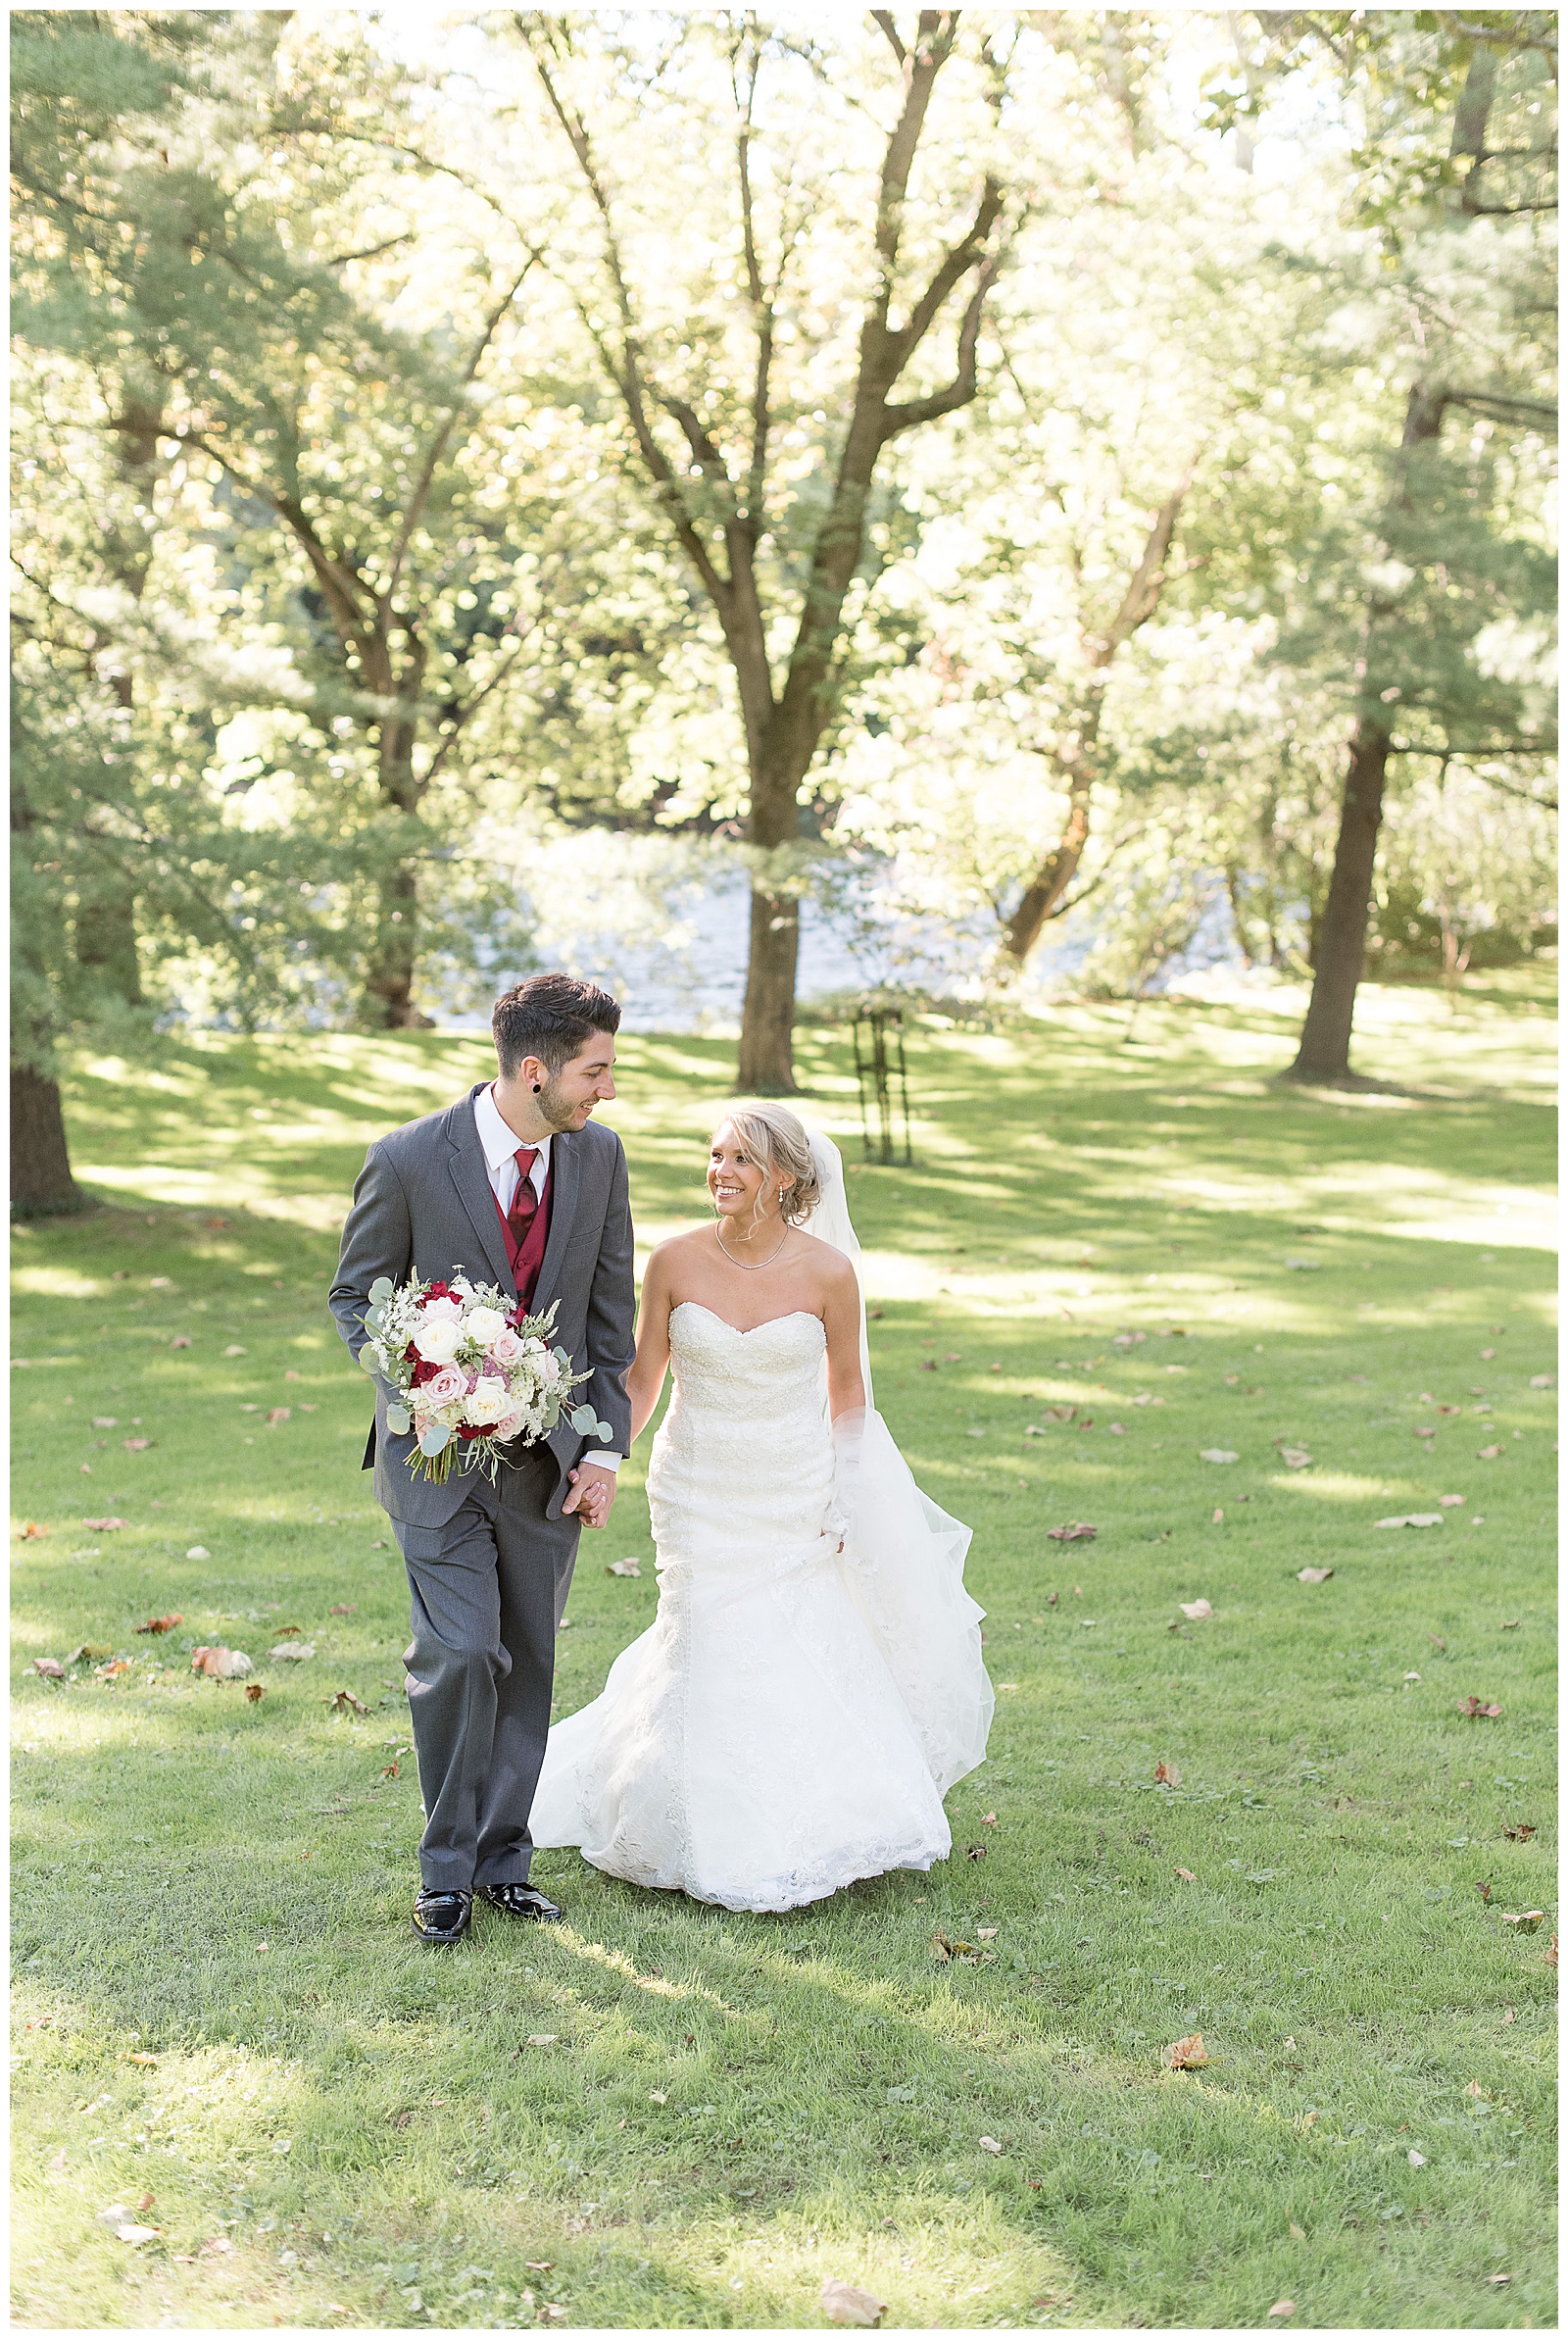 couple is holding hands and walking towards the camera smiling with groom on the left and bride on the right holding her gown with her left hand and the groom is holding the bride's floral bouquet in his right hand as they look at each other with grass, trees, and sunshine behind them at Riverdale Manor in Lancaster, PA